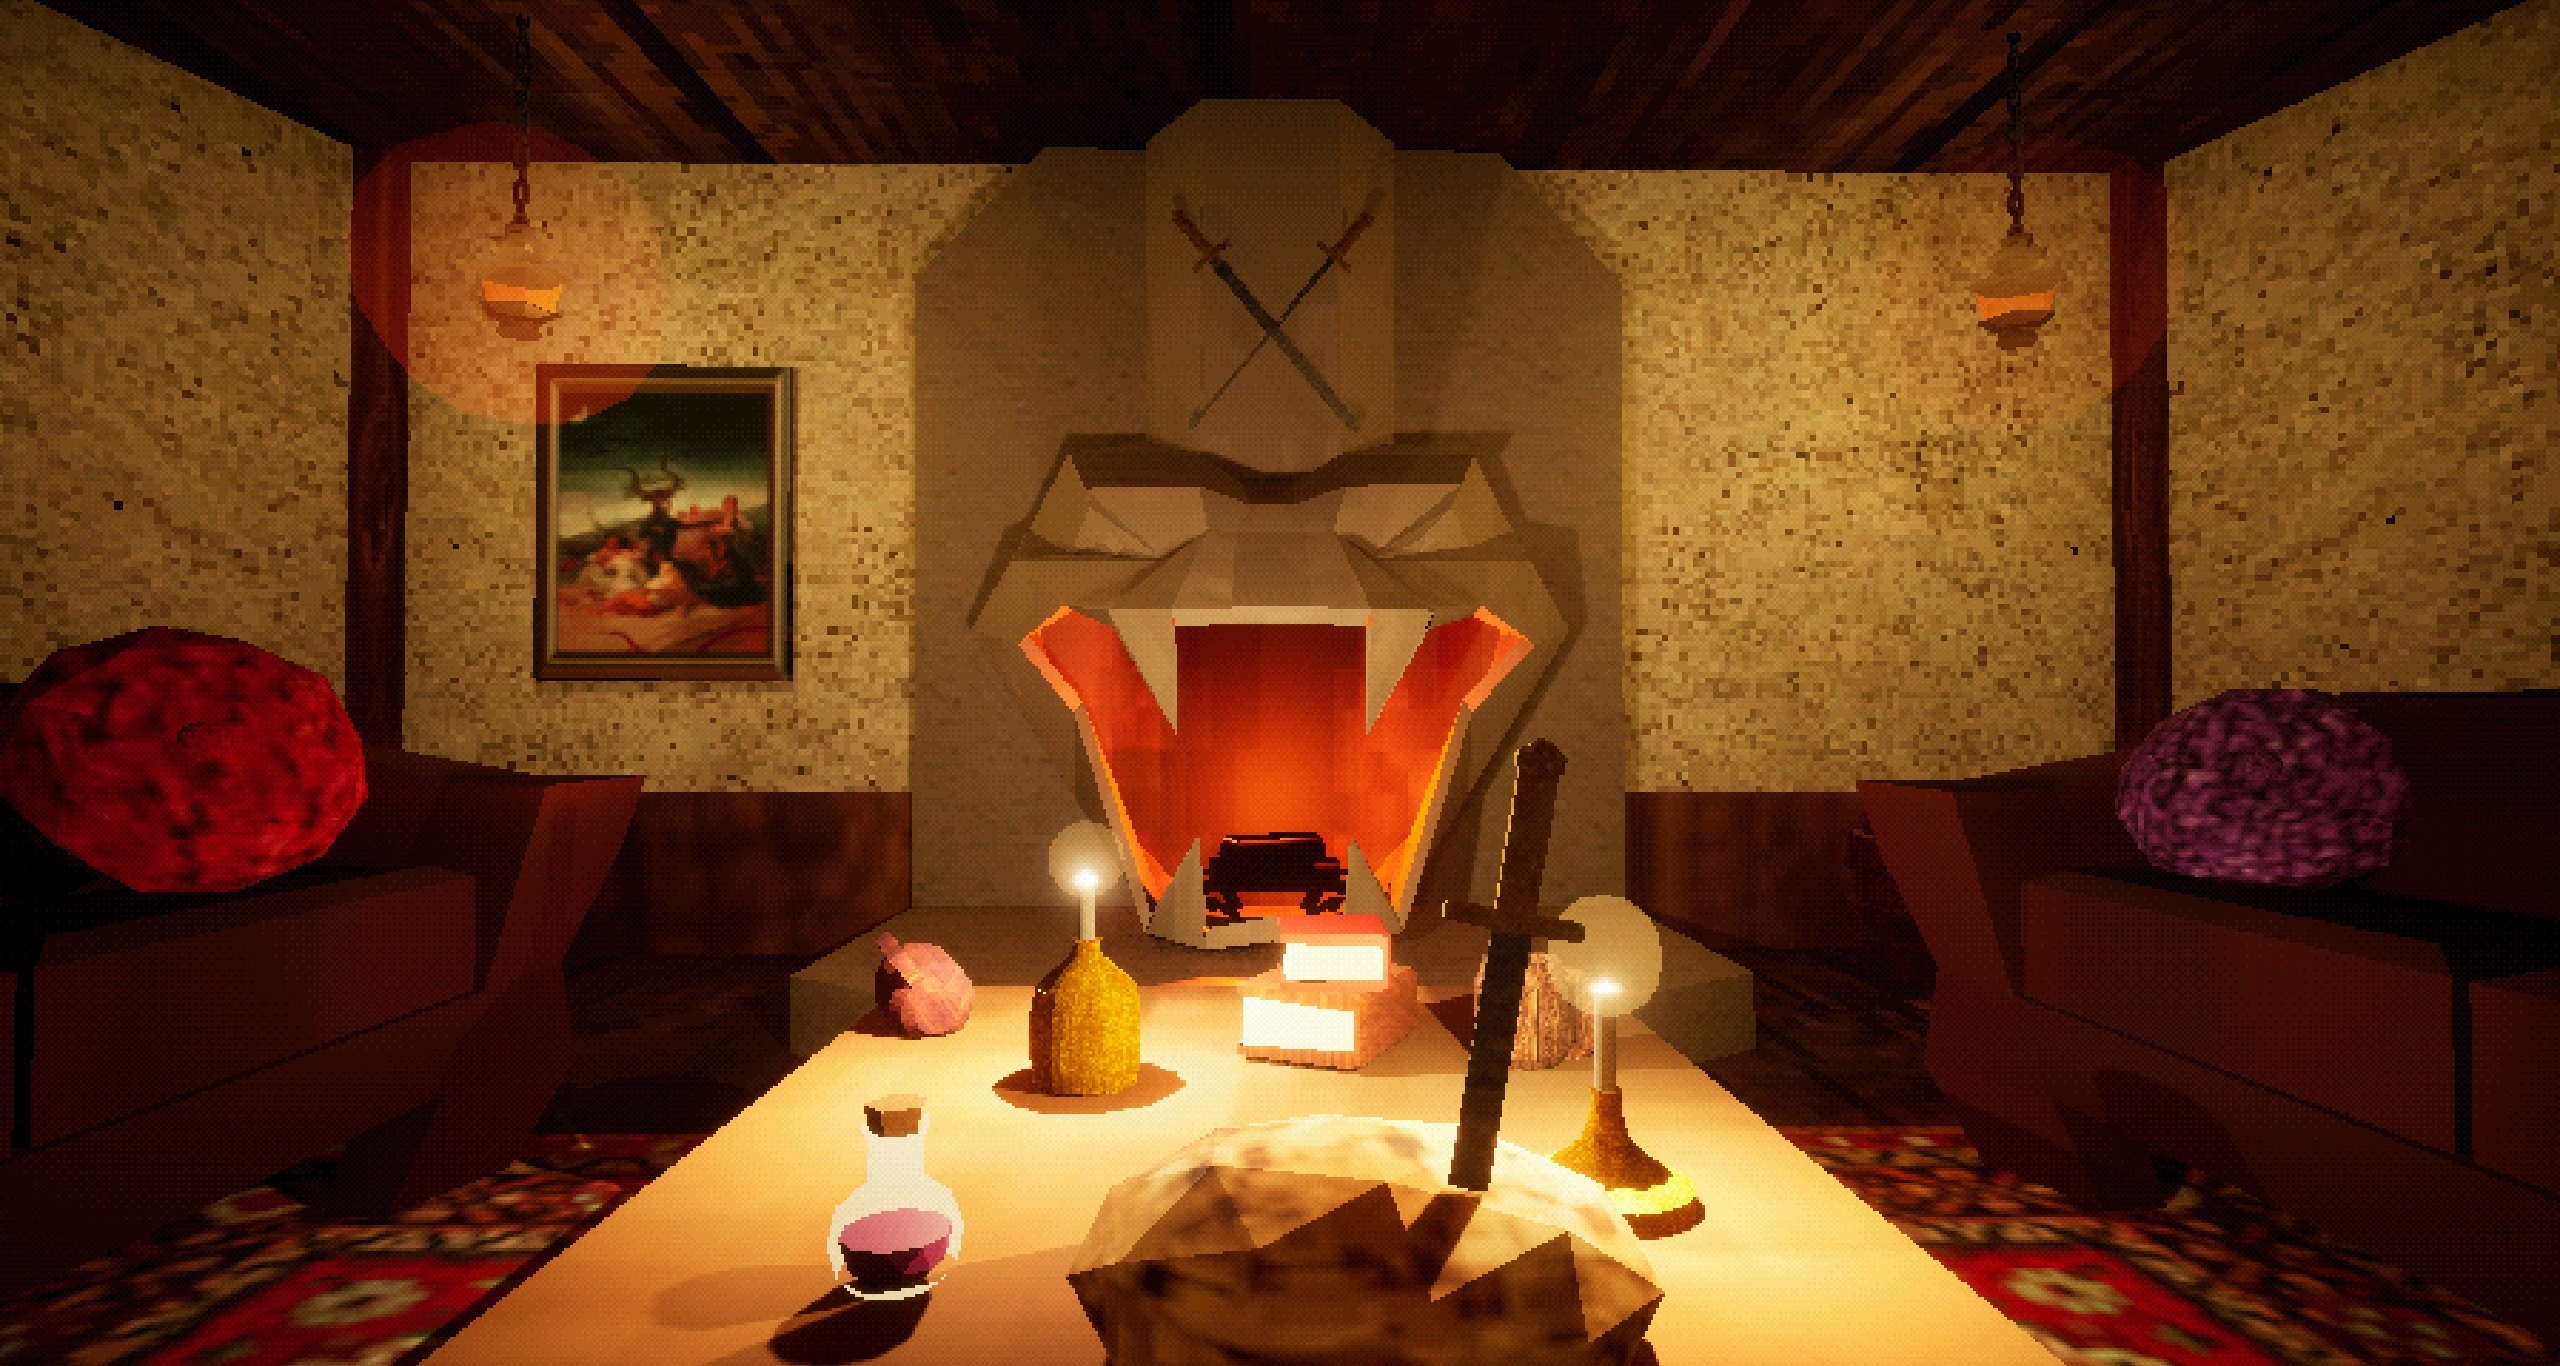 cozy view of serpent's mouth-shaped fireplace in background, table in foreground with scattered foodstuffs, drinks, and a loaf of bread with a dagger in it. Couches visible off to either side.